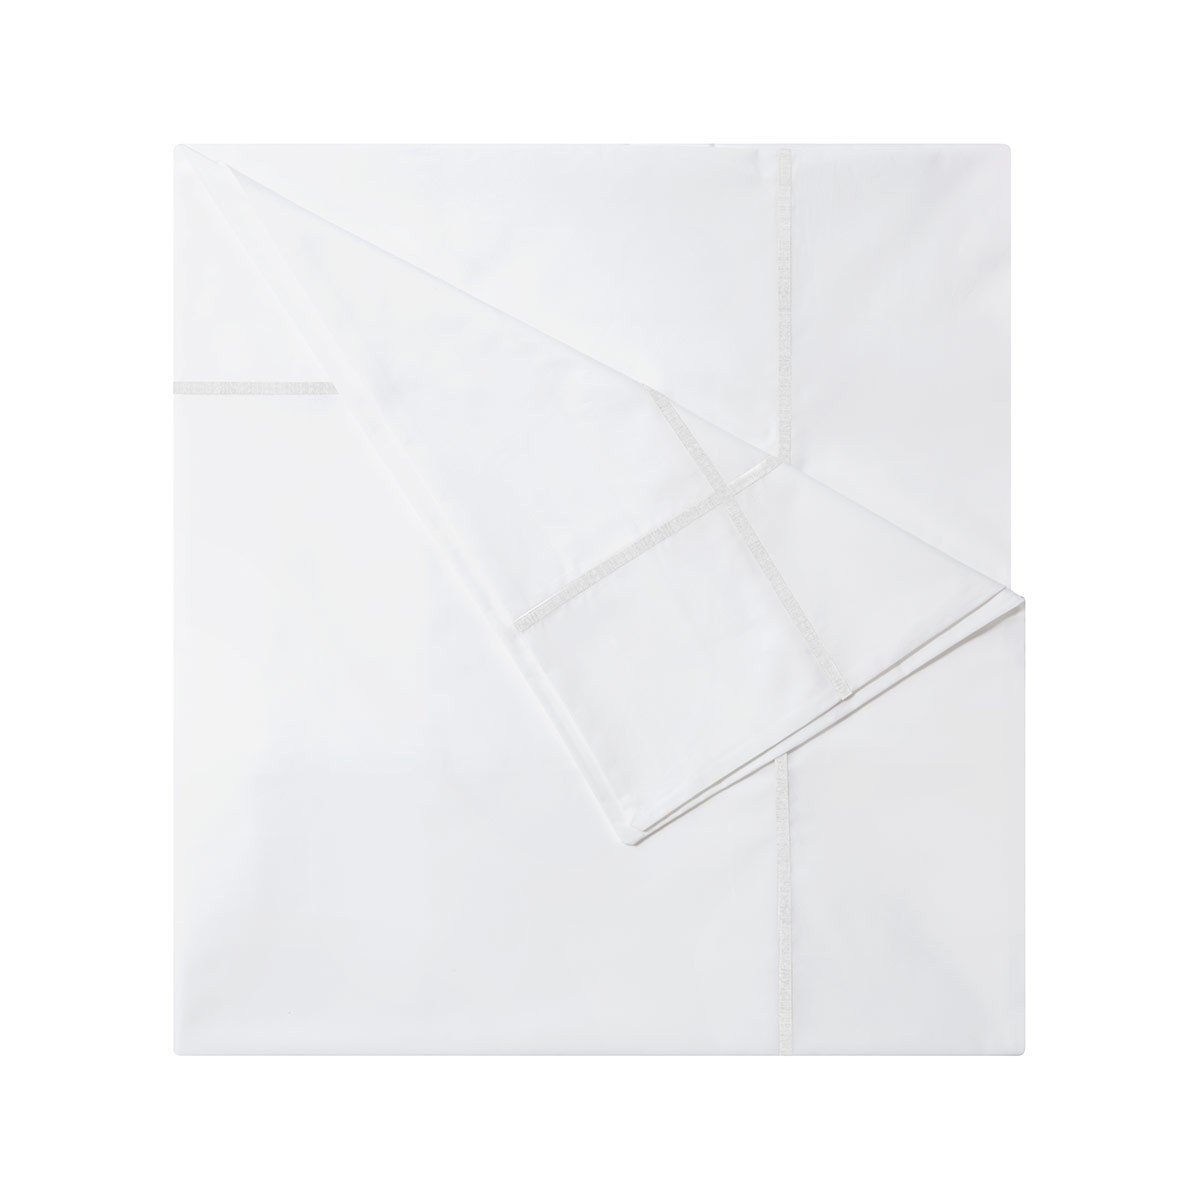 Athena Blanc Bedding Collection by Yves Delorme | Fig Linens - White duvet cover